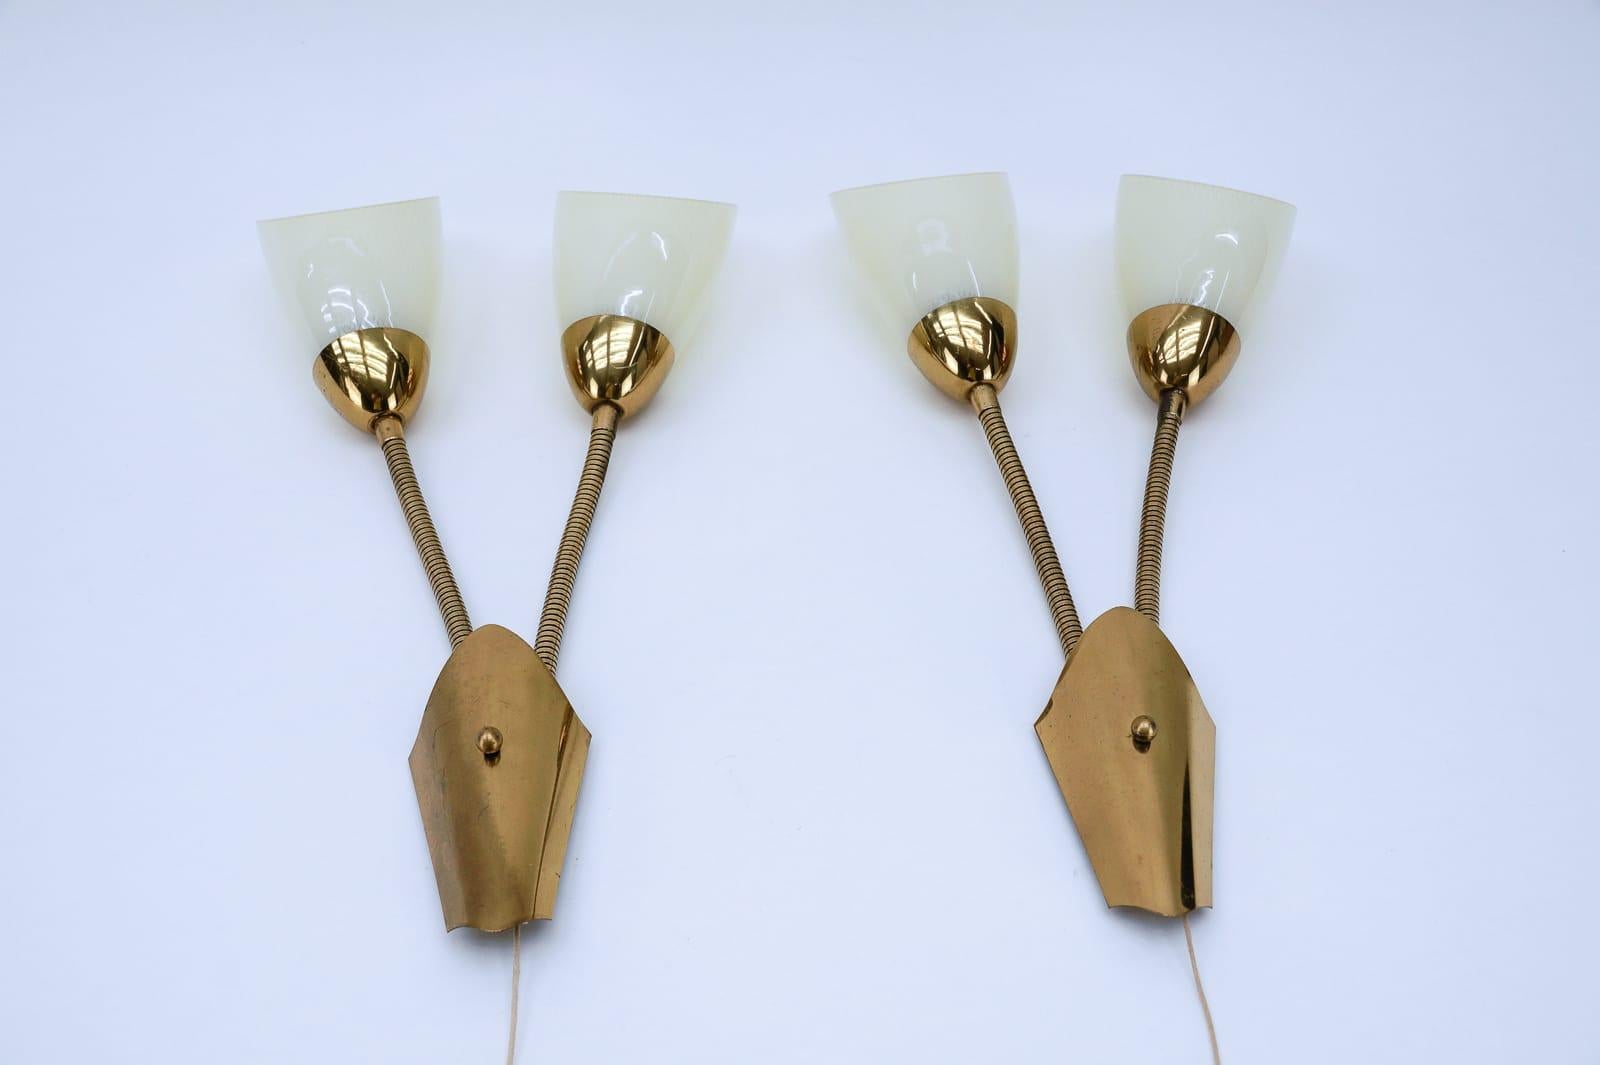 Mid-Century Modern Pair of Double Arm Wall Lamps with Flexible Arms from the 1950s, Probably Italy For Sale